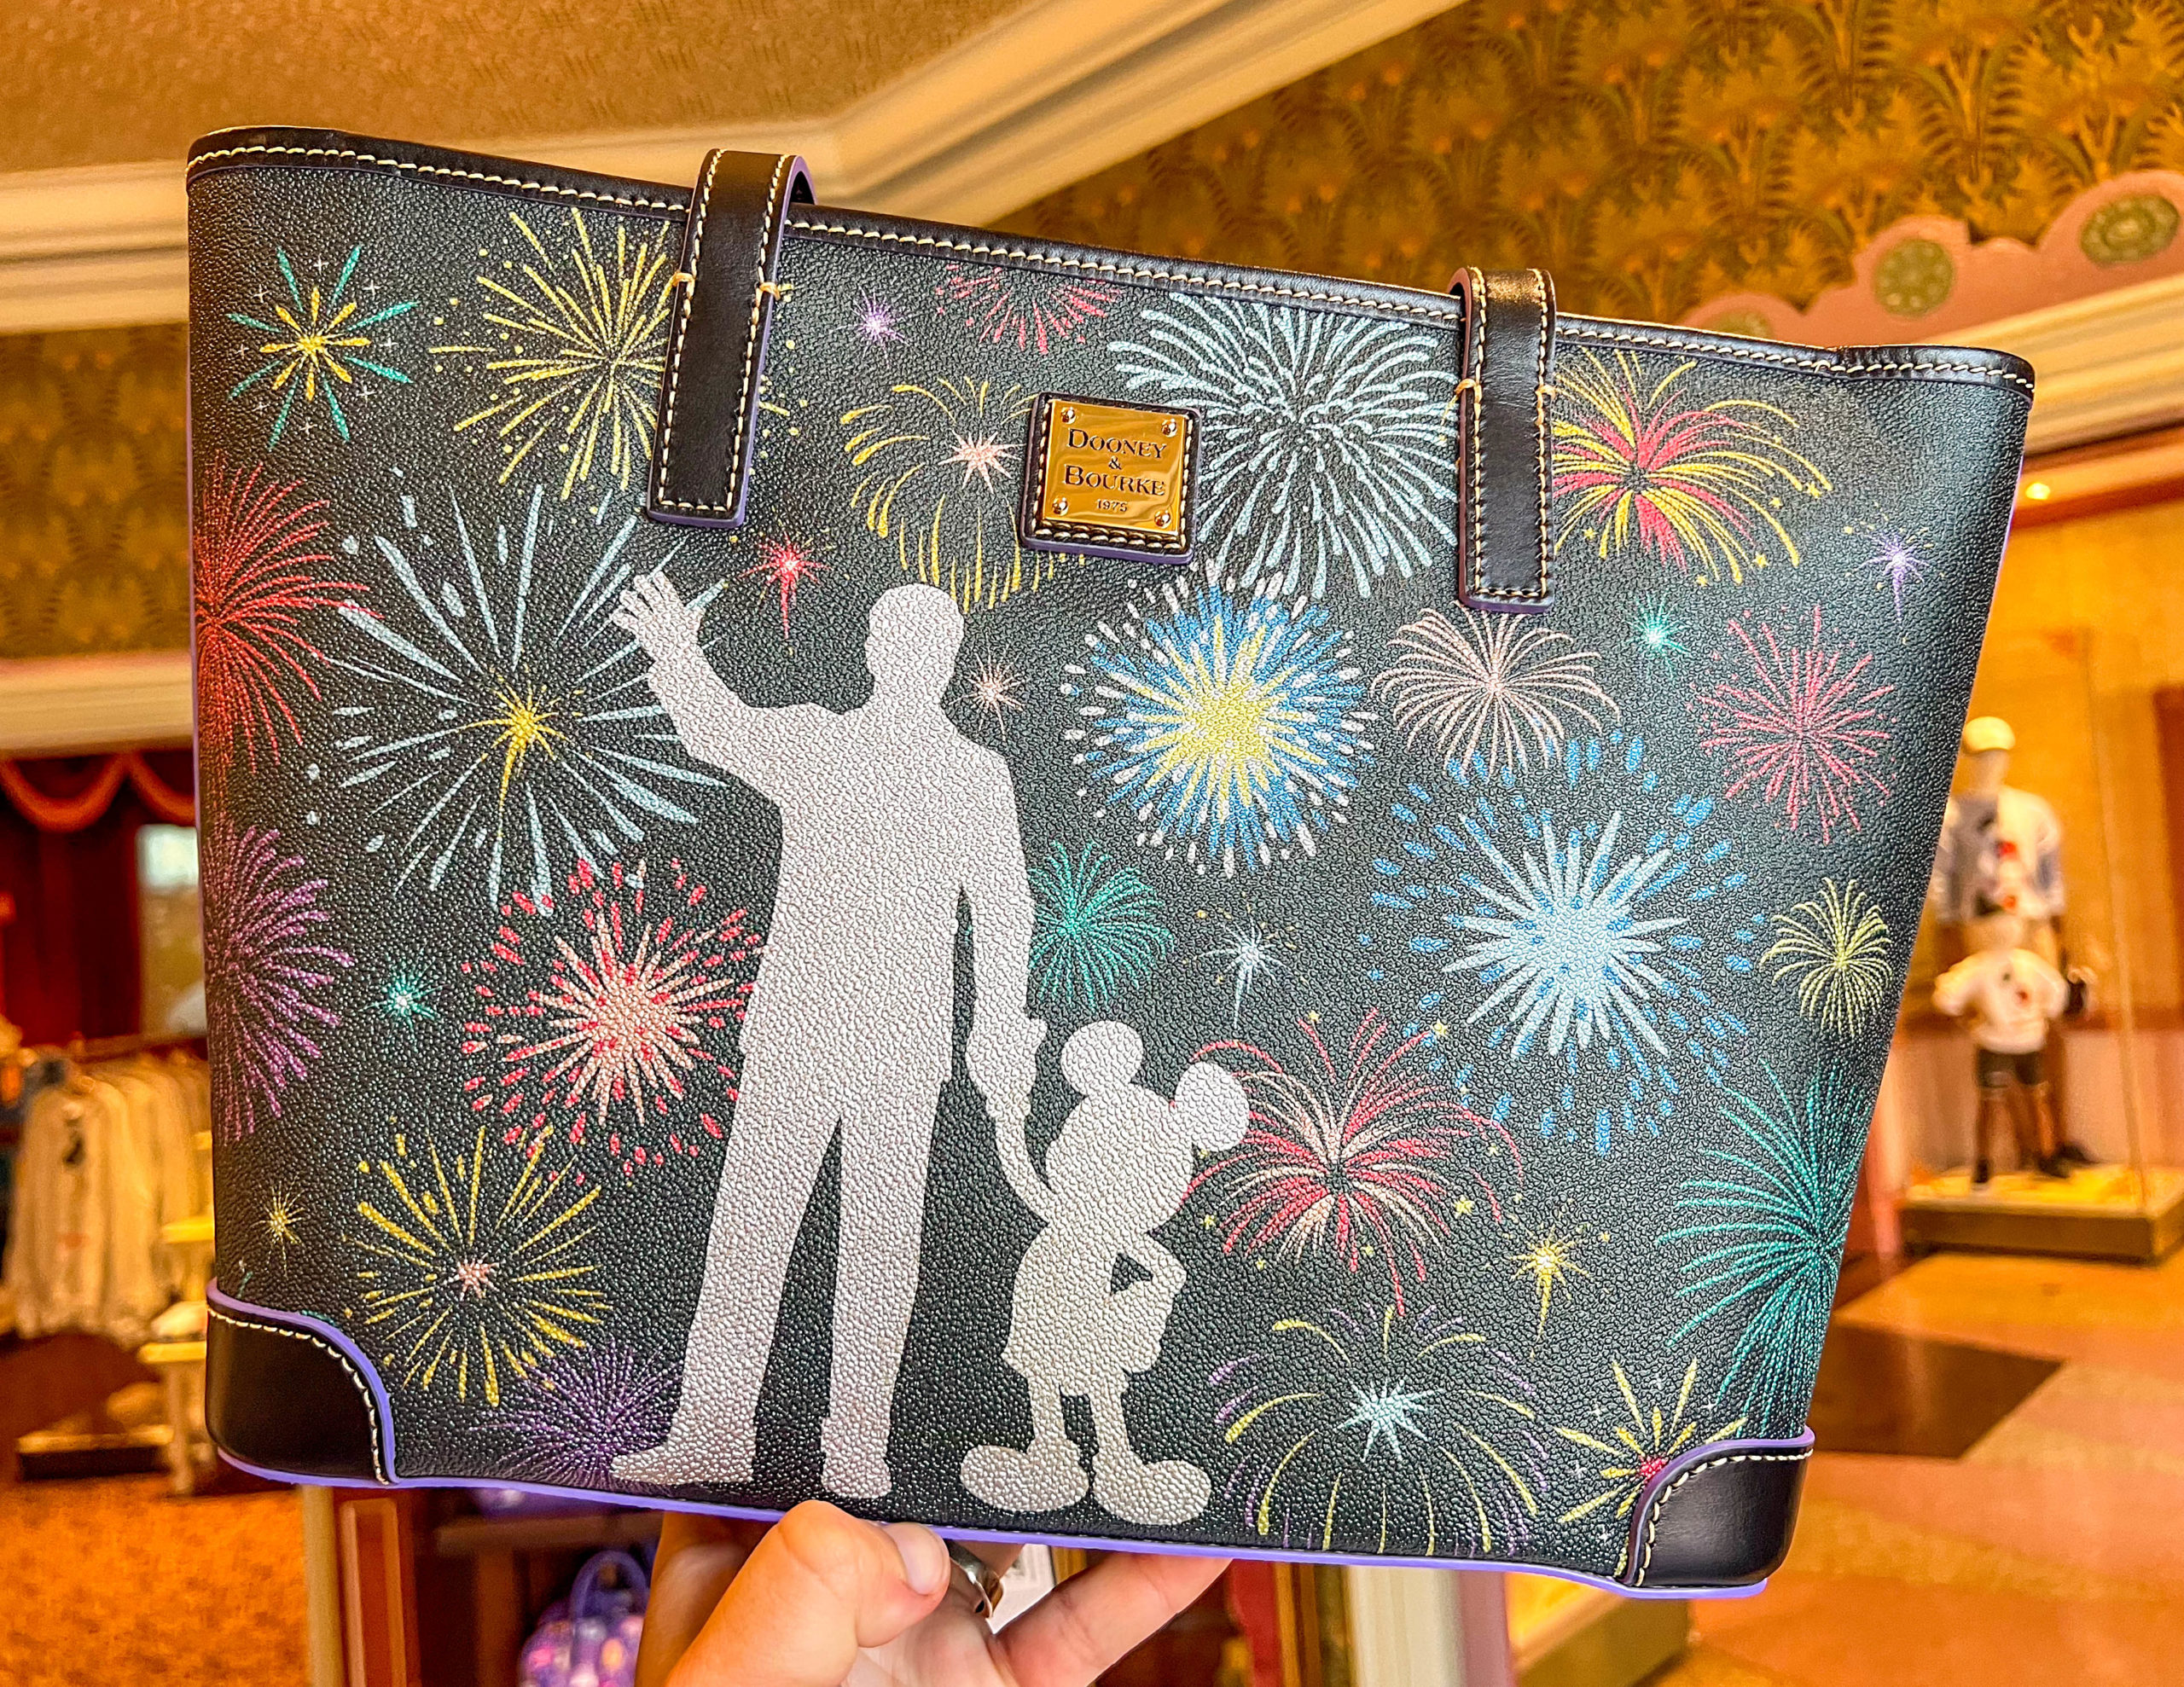 Check Out the NEW Disney100 Partners Dooney & Bourke Tote Bag 